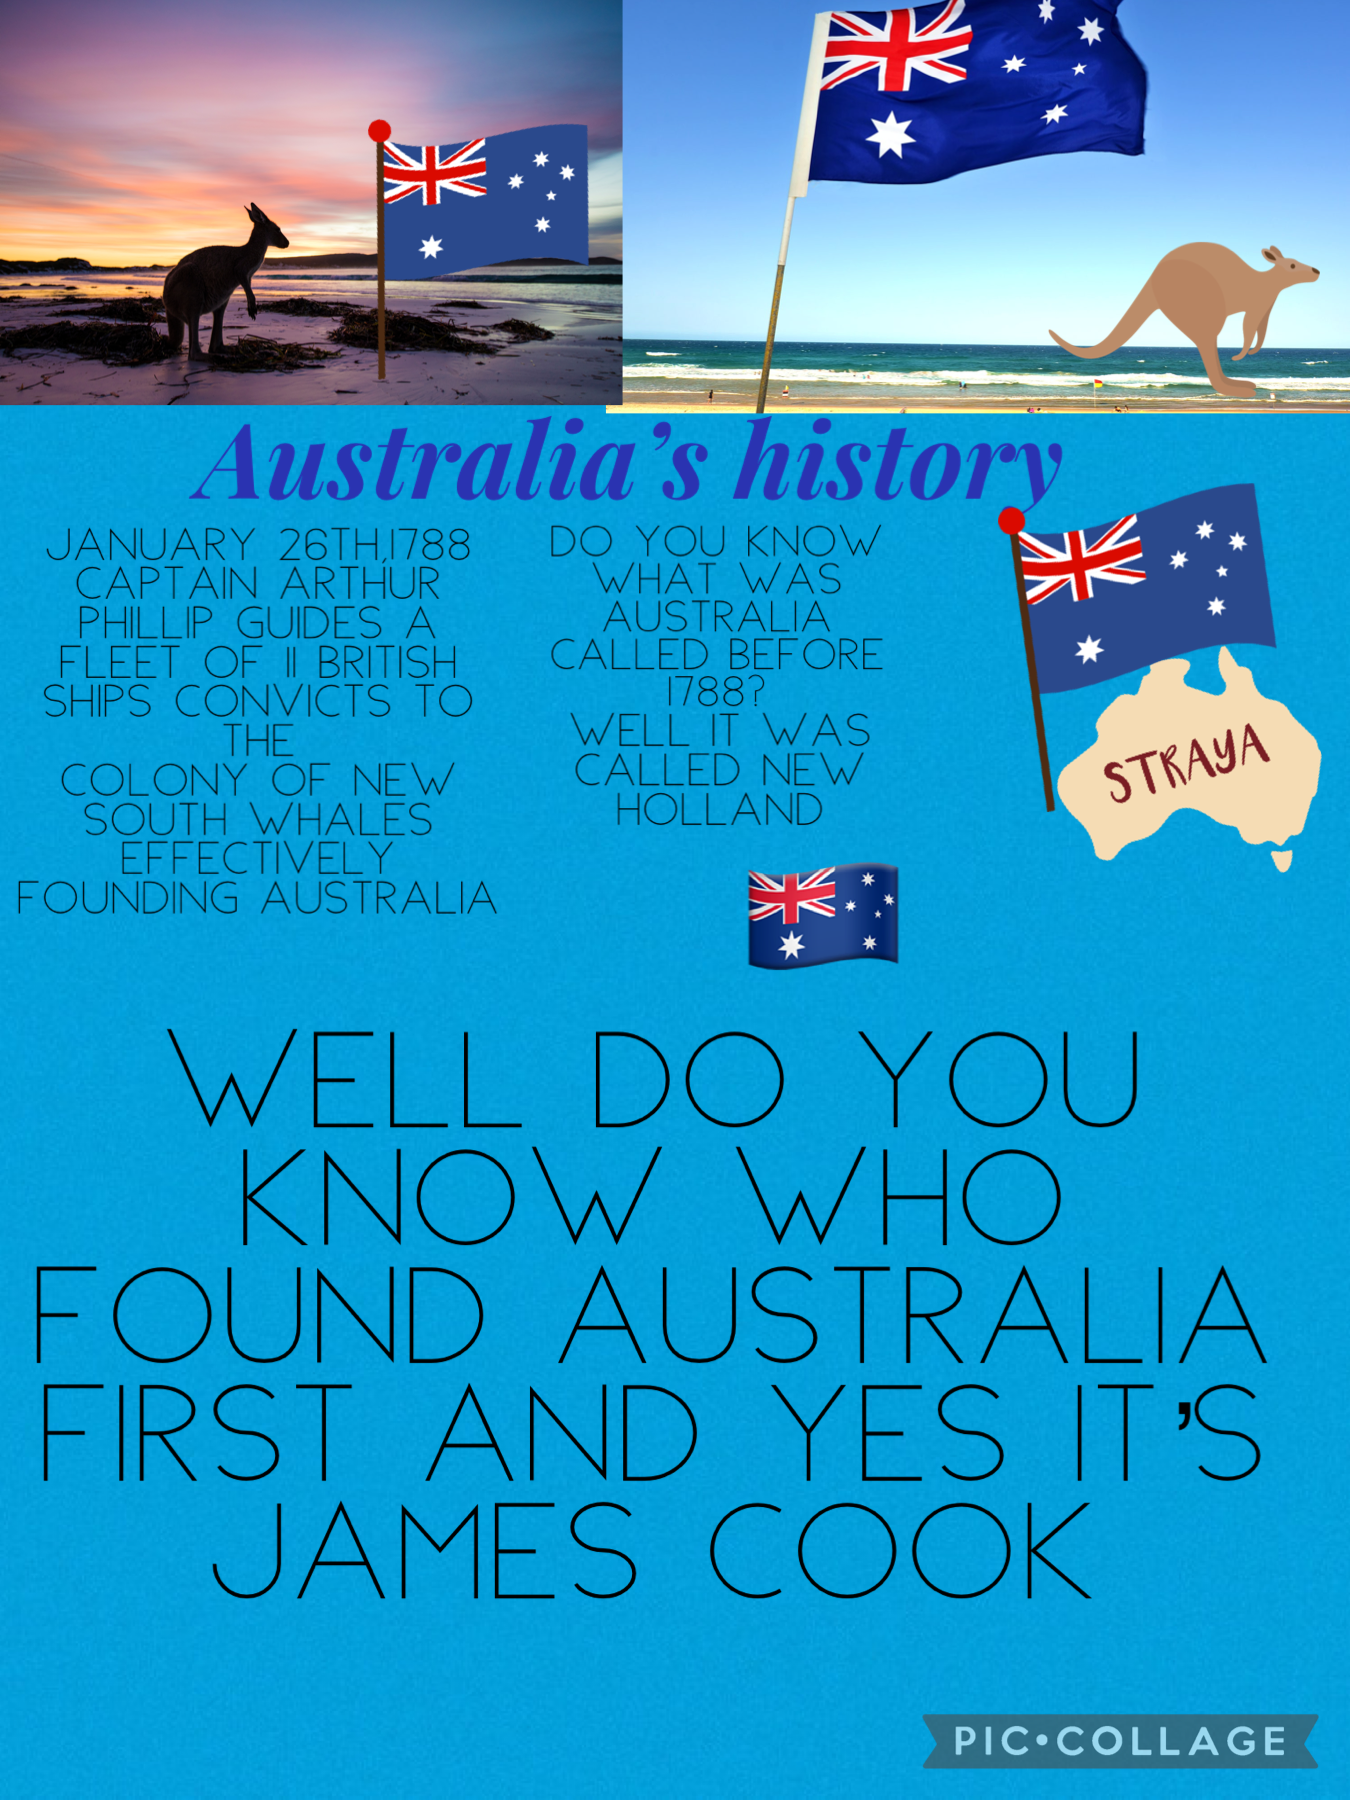 All about Australia history